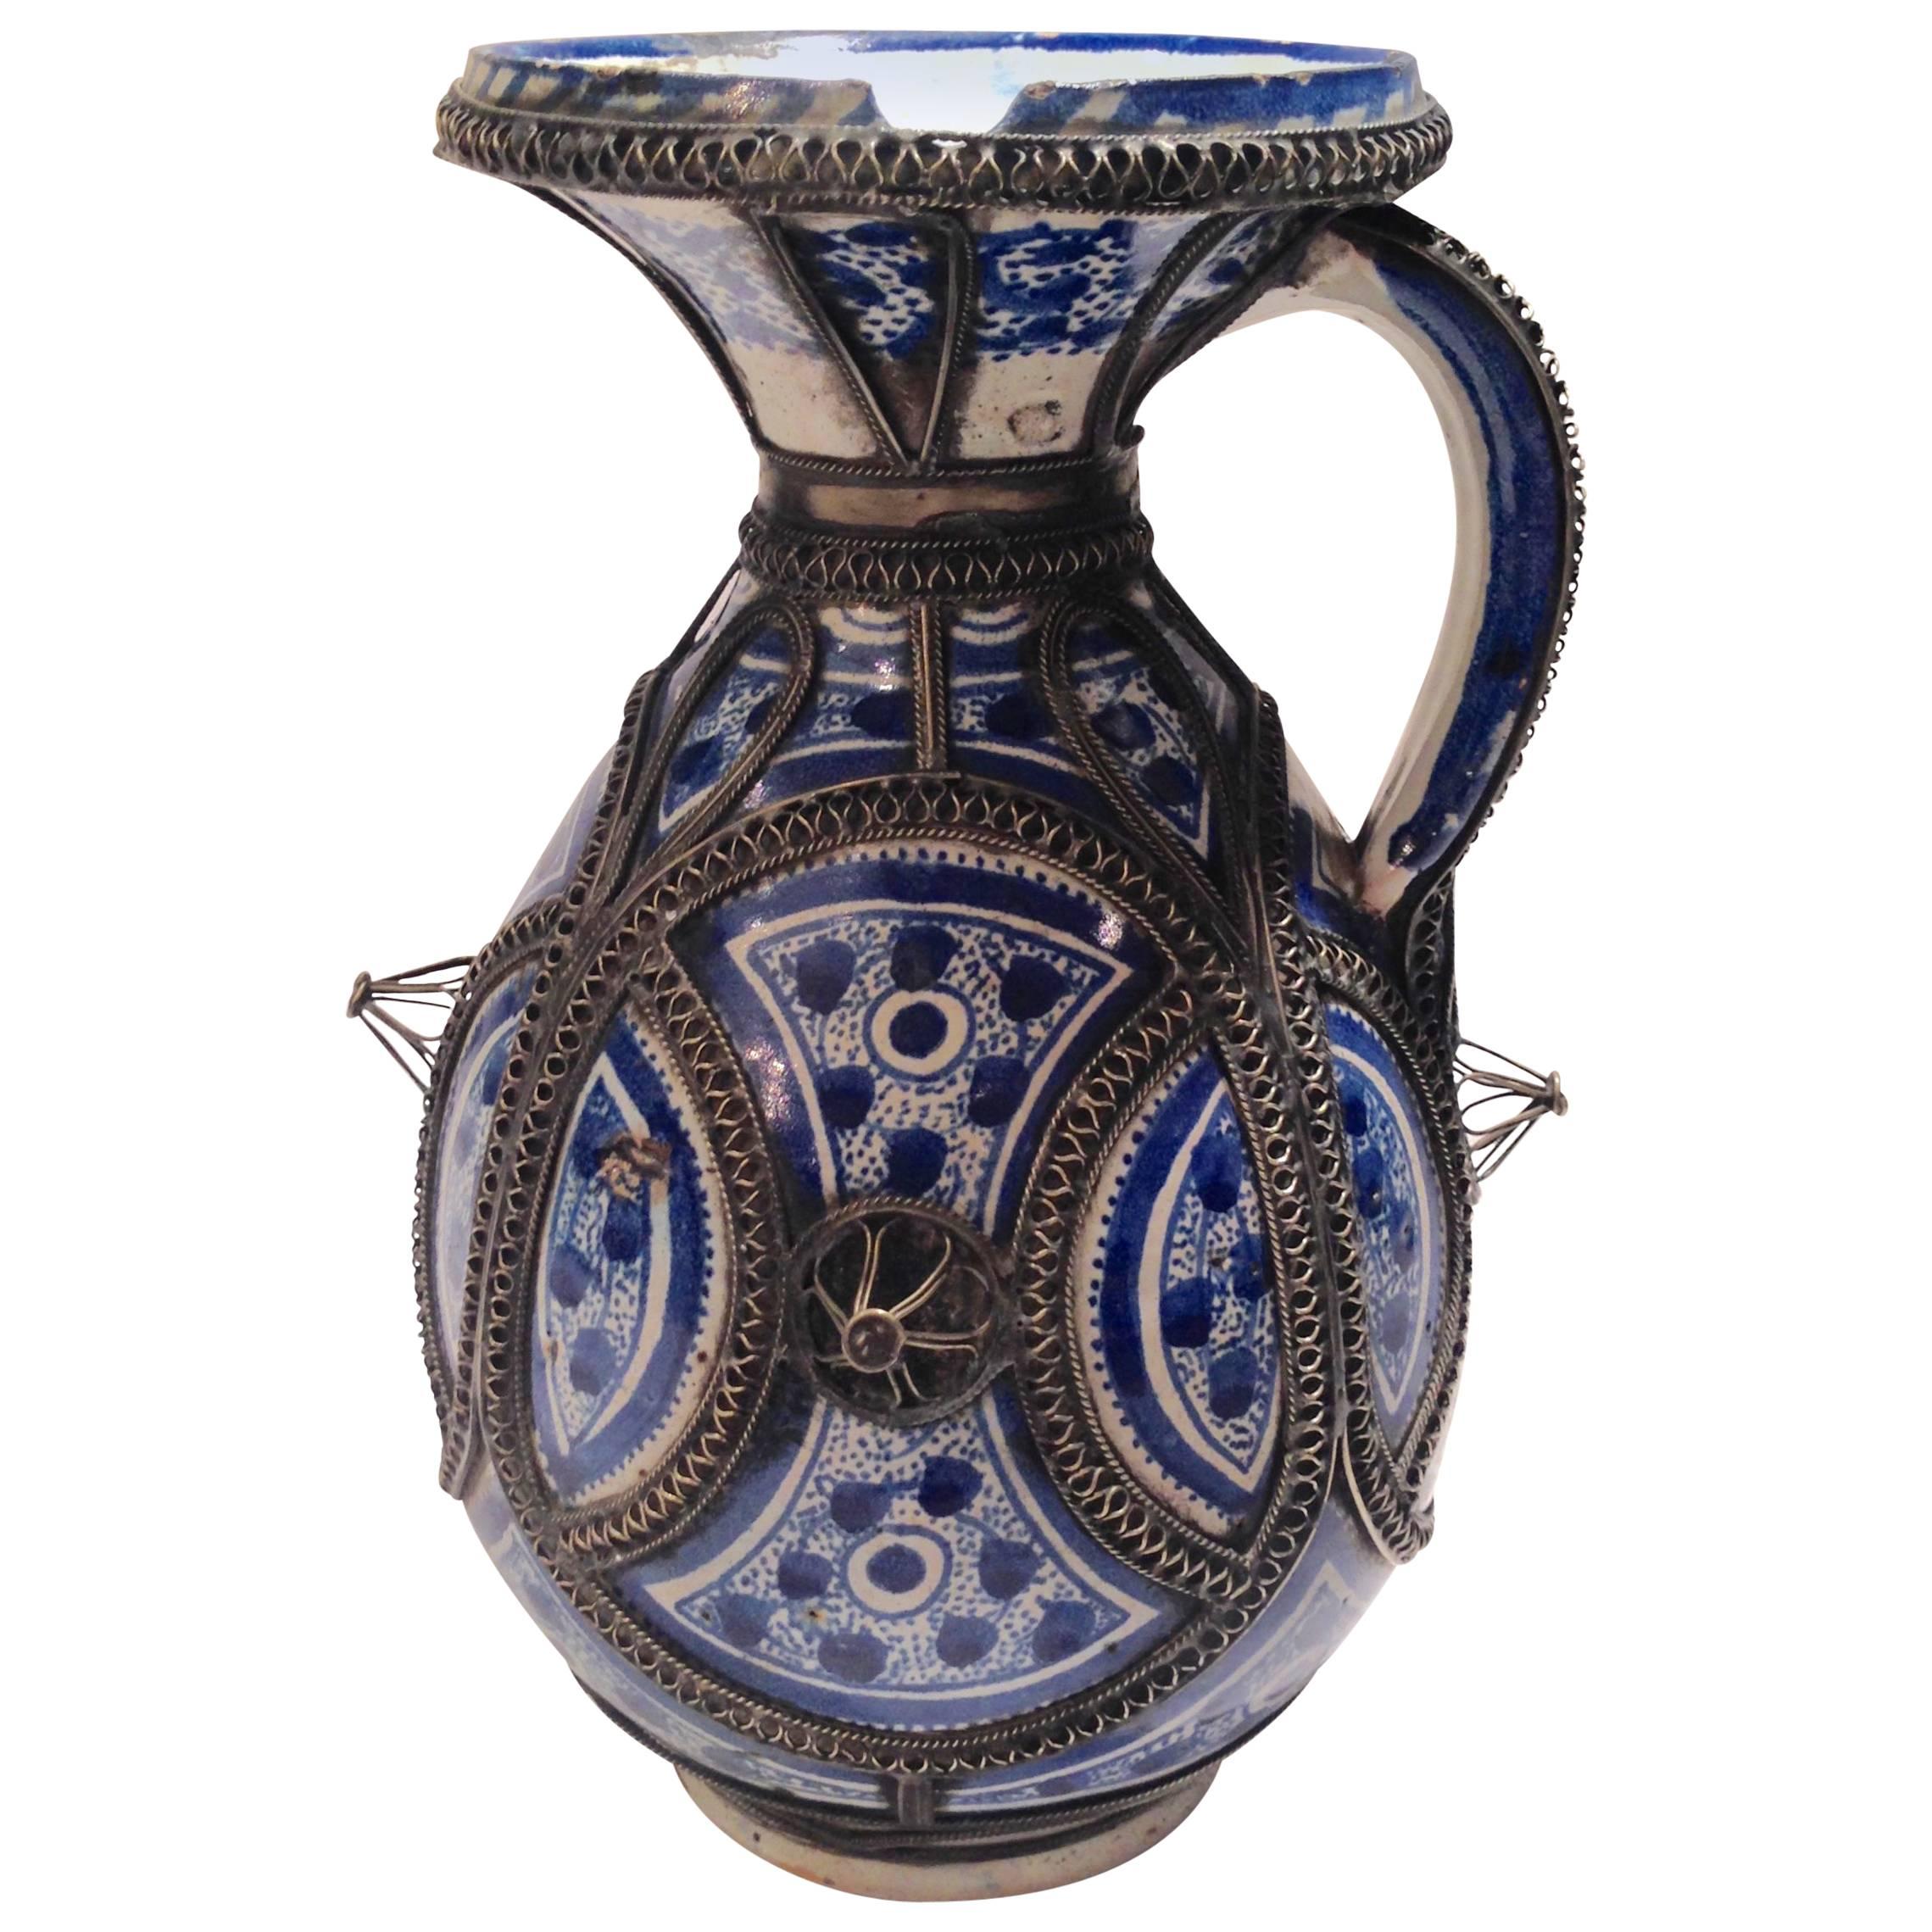 Vintage Morocco Ceramic Handled Pitcher with Silver Overlay